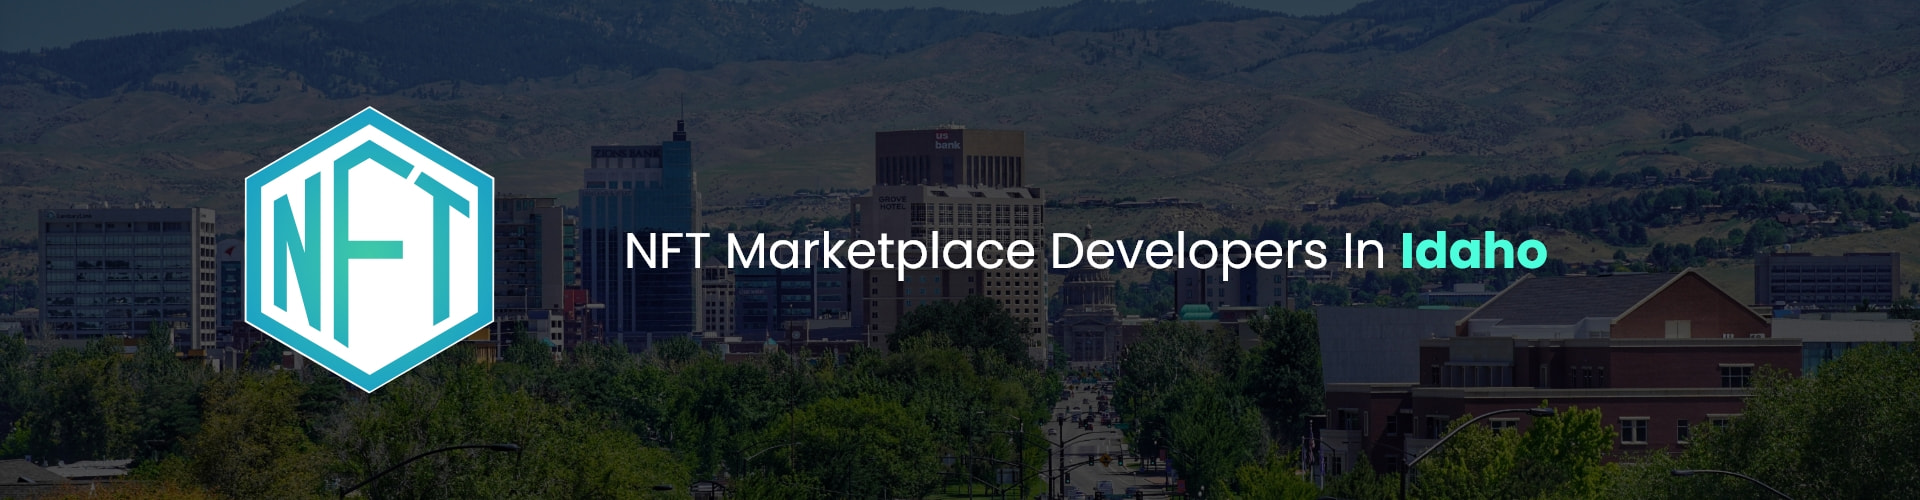 hire nft marketplace developers in idaho